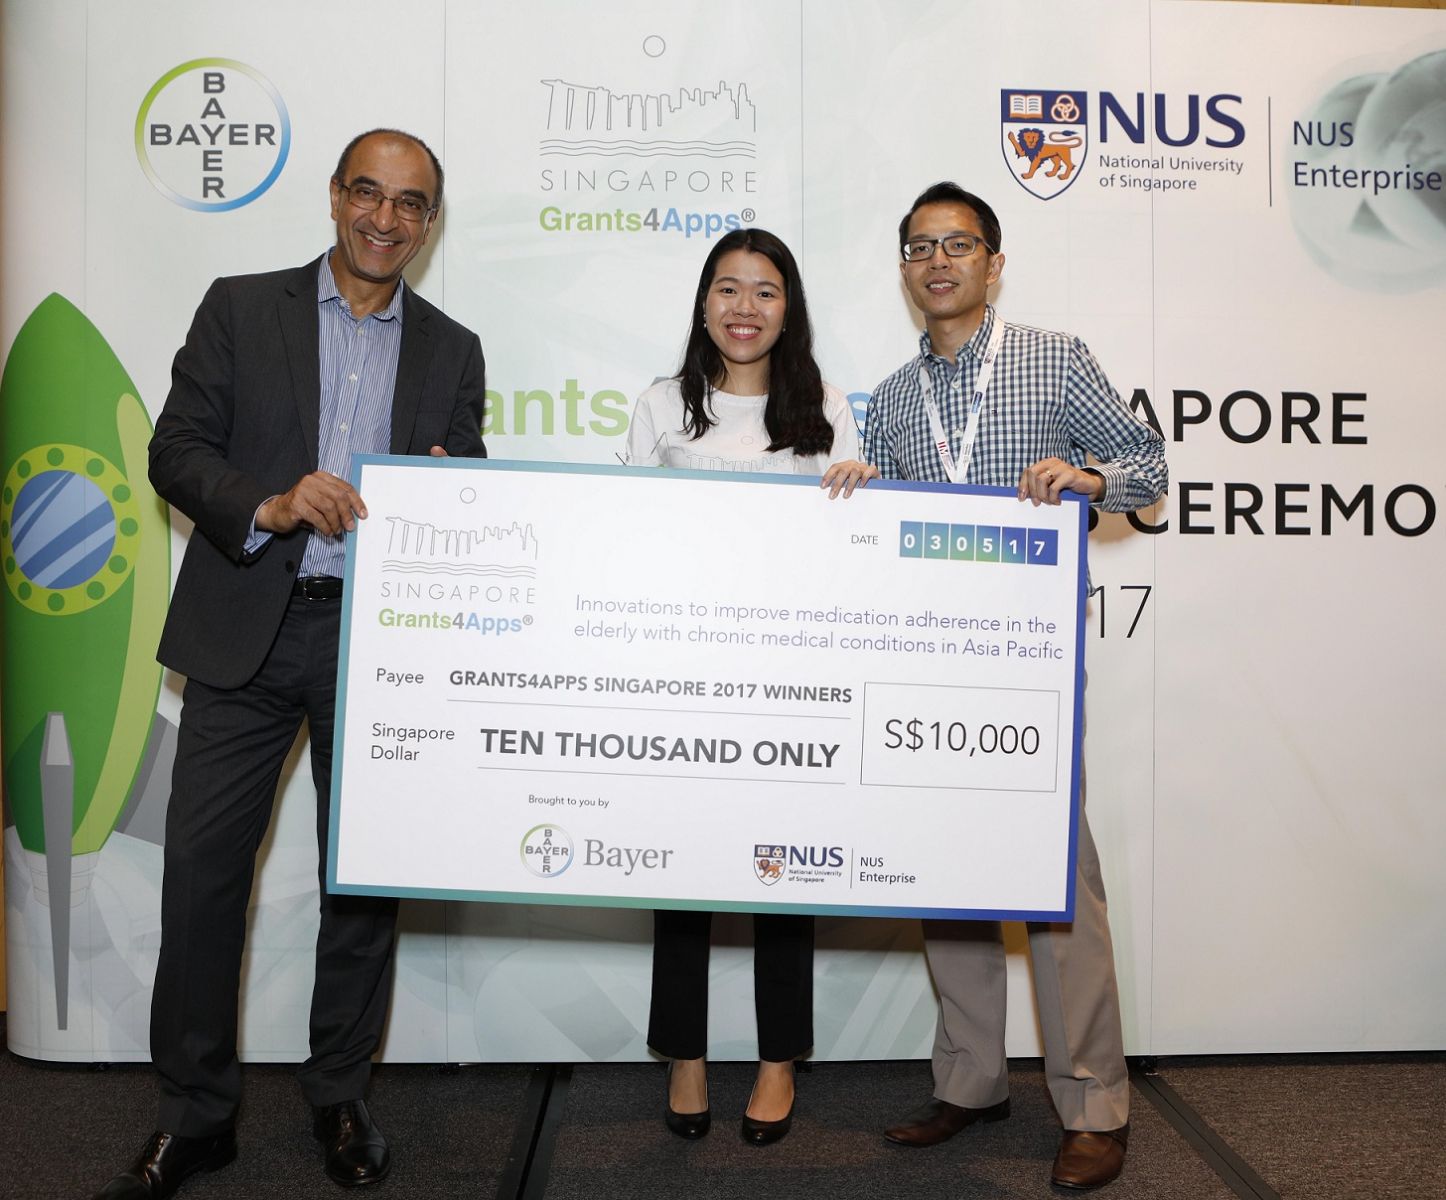 Bayer and NUS Enterprise announce winners of Grants4Apps Singapore Open Innovation Challenge